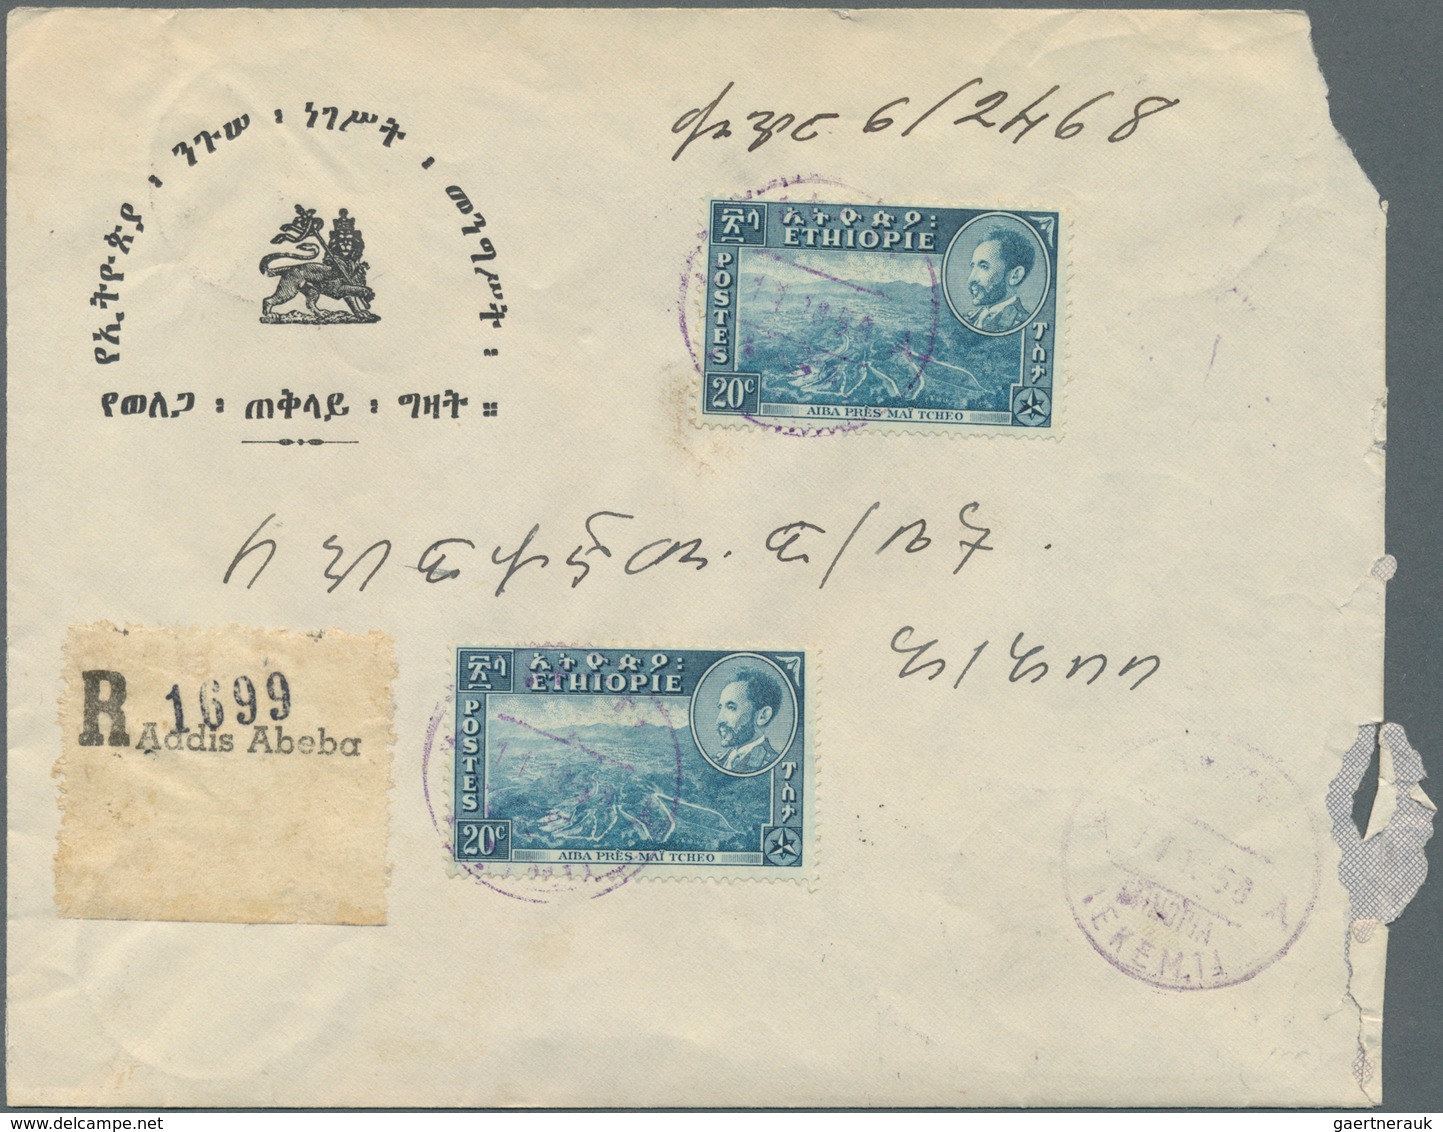 Äthiopien: 1921/73, covers used foreign (7 inc. one ppc) or inland (14, mostly registered inc. expre